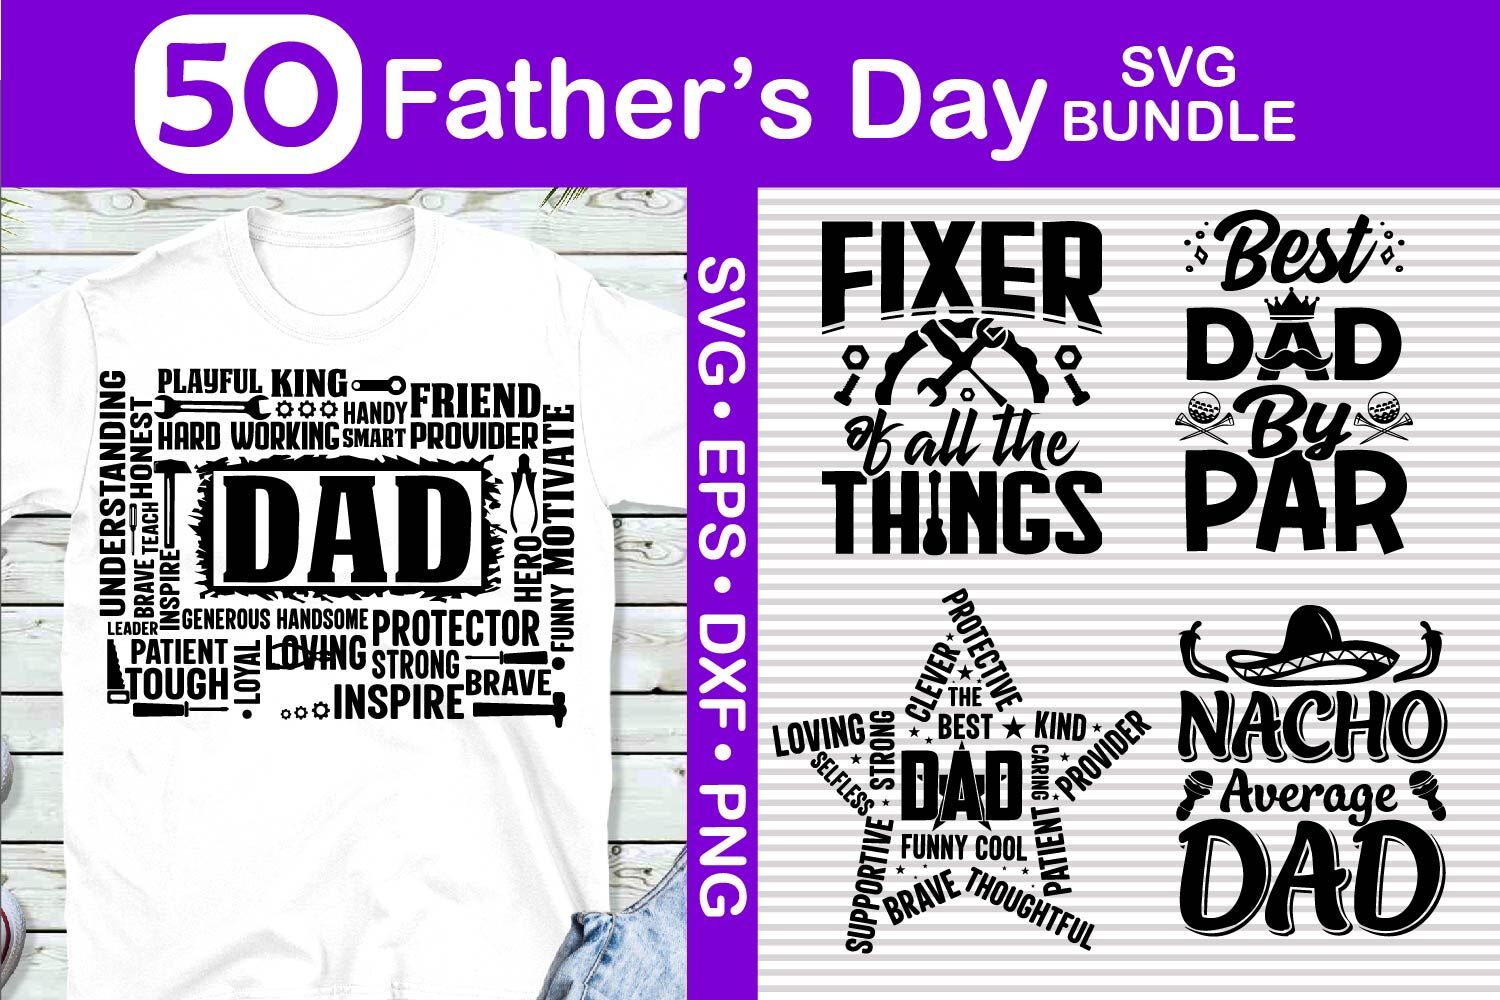 Mens Reel Great Dad T shirt Funny Fathers Day Kosovo